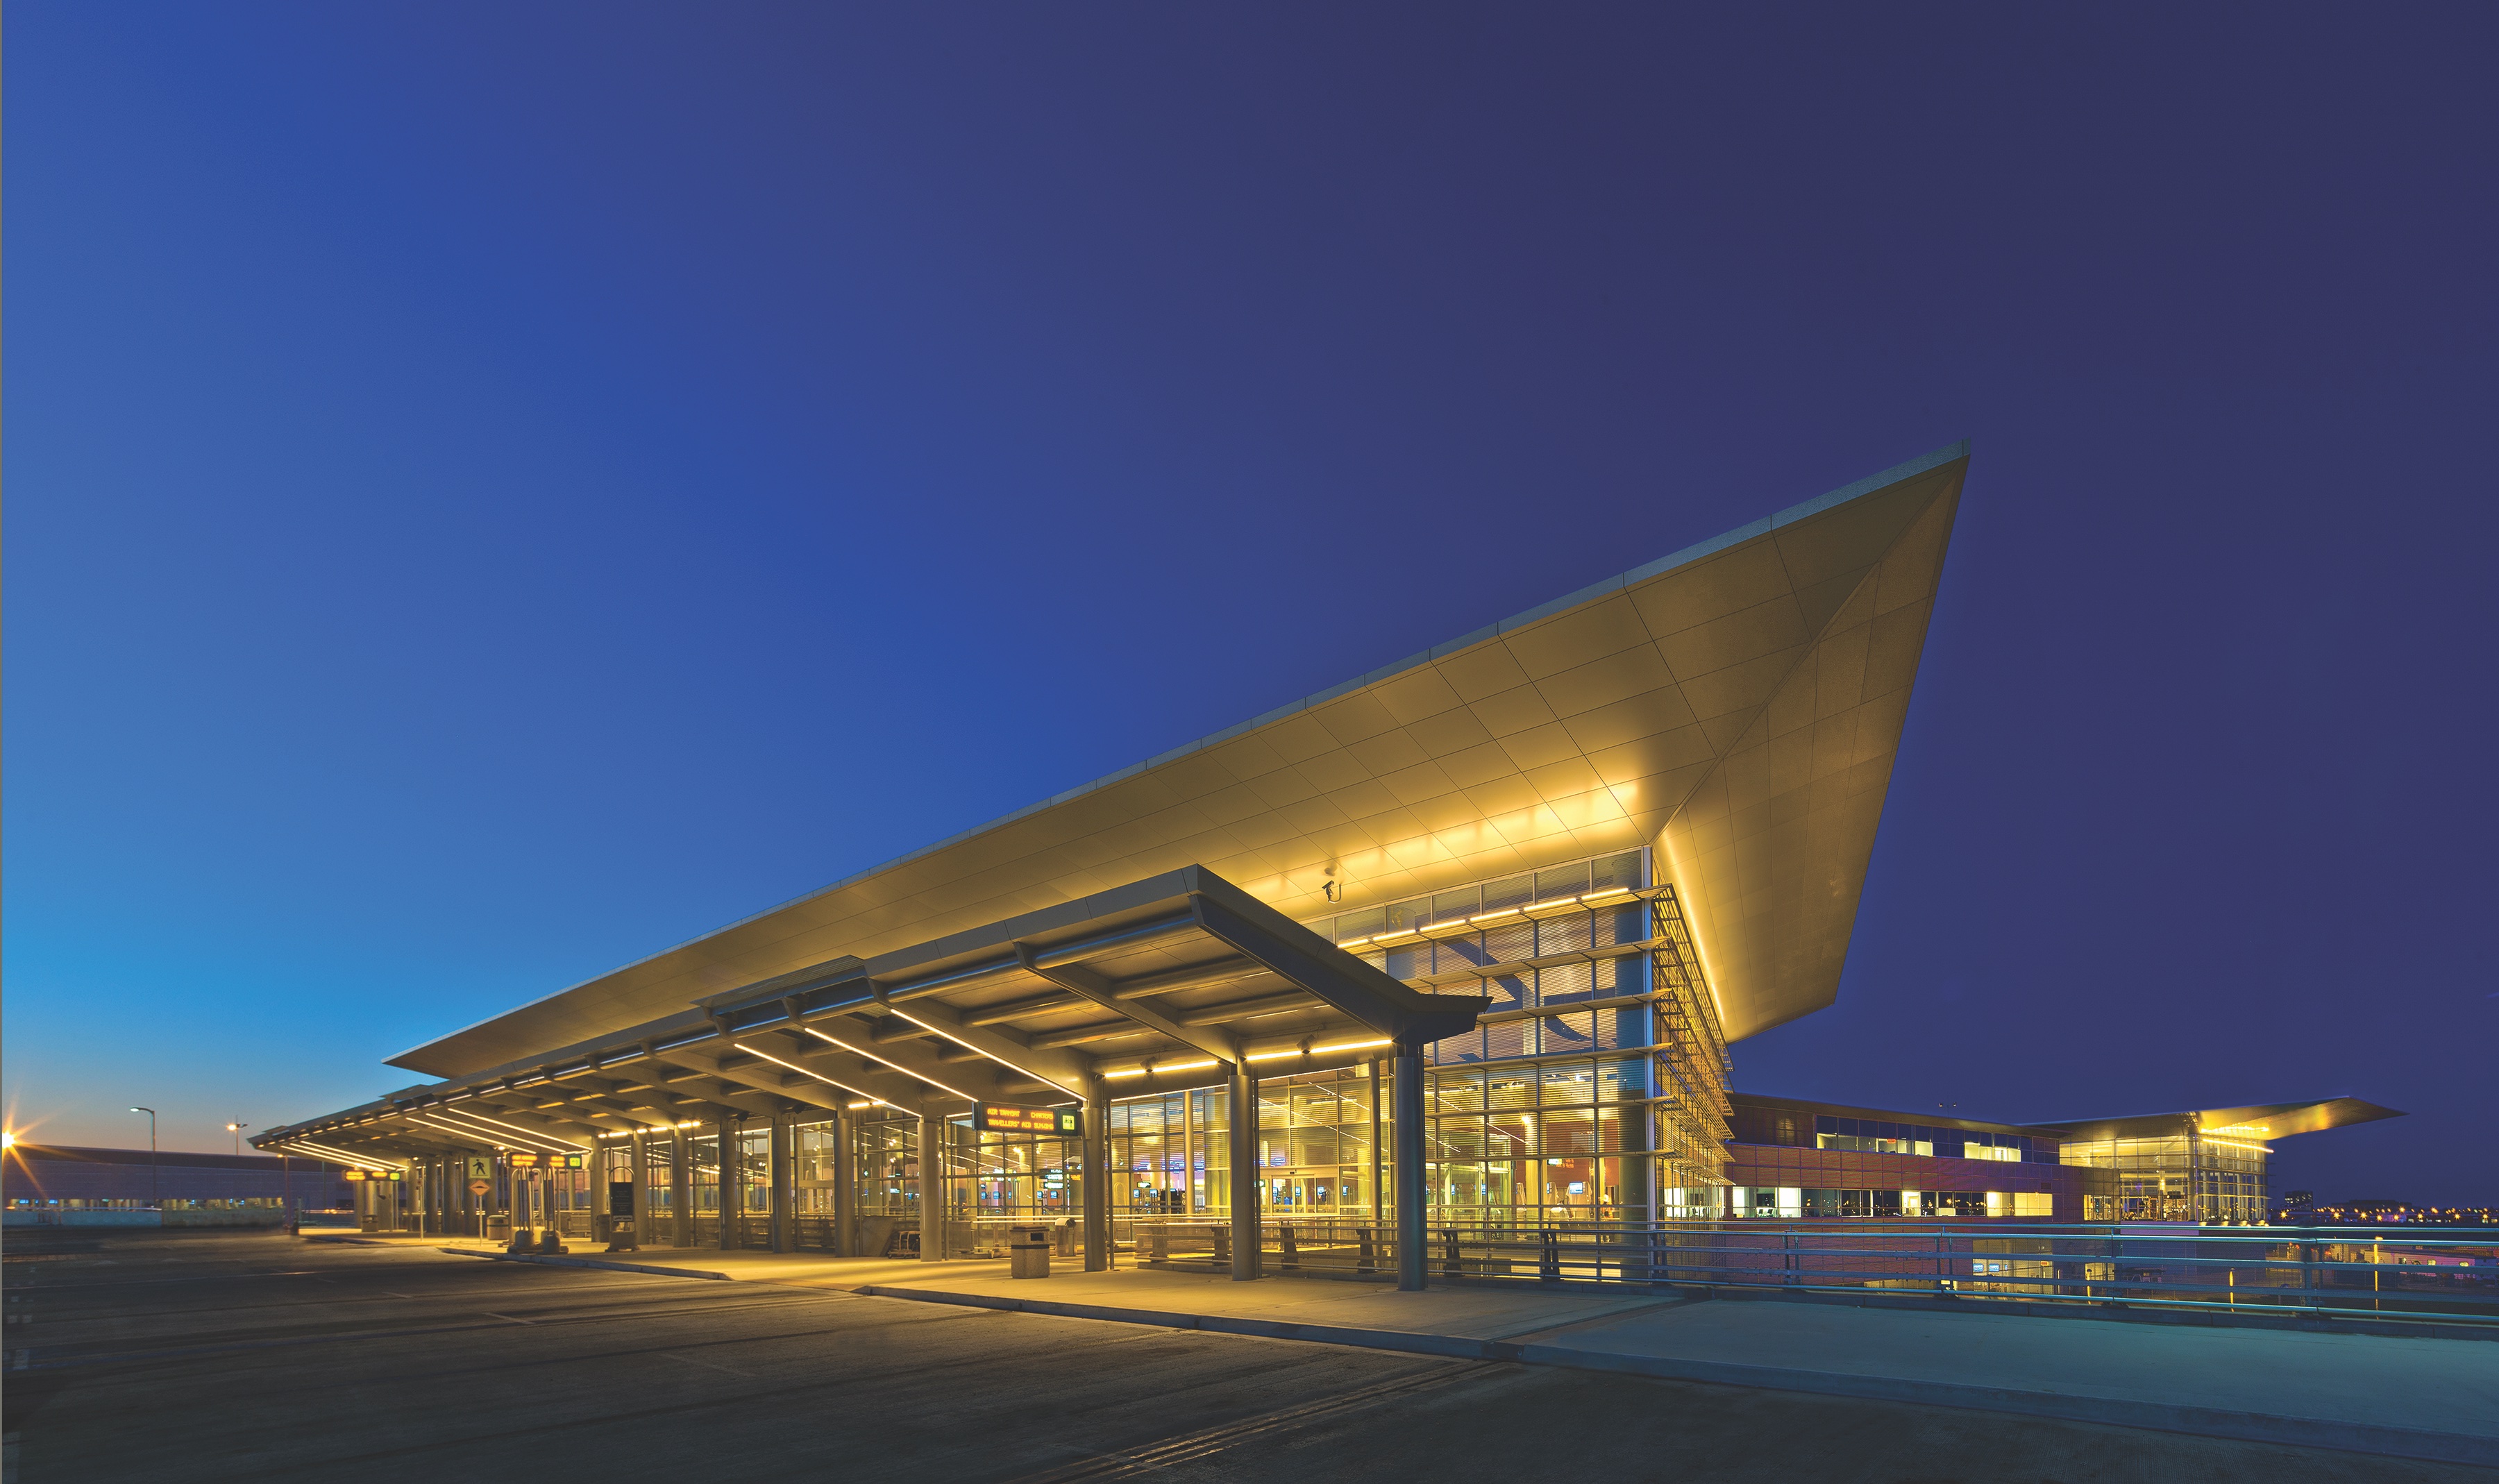 The airport terminal building at night.